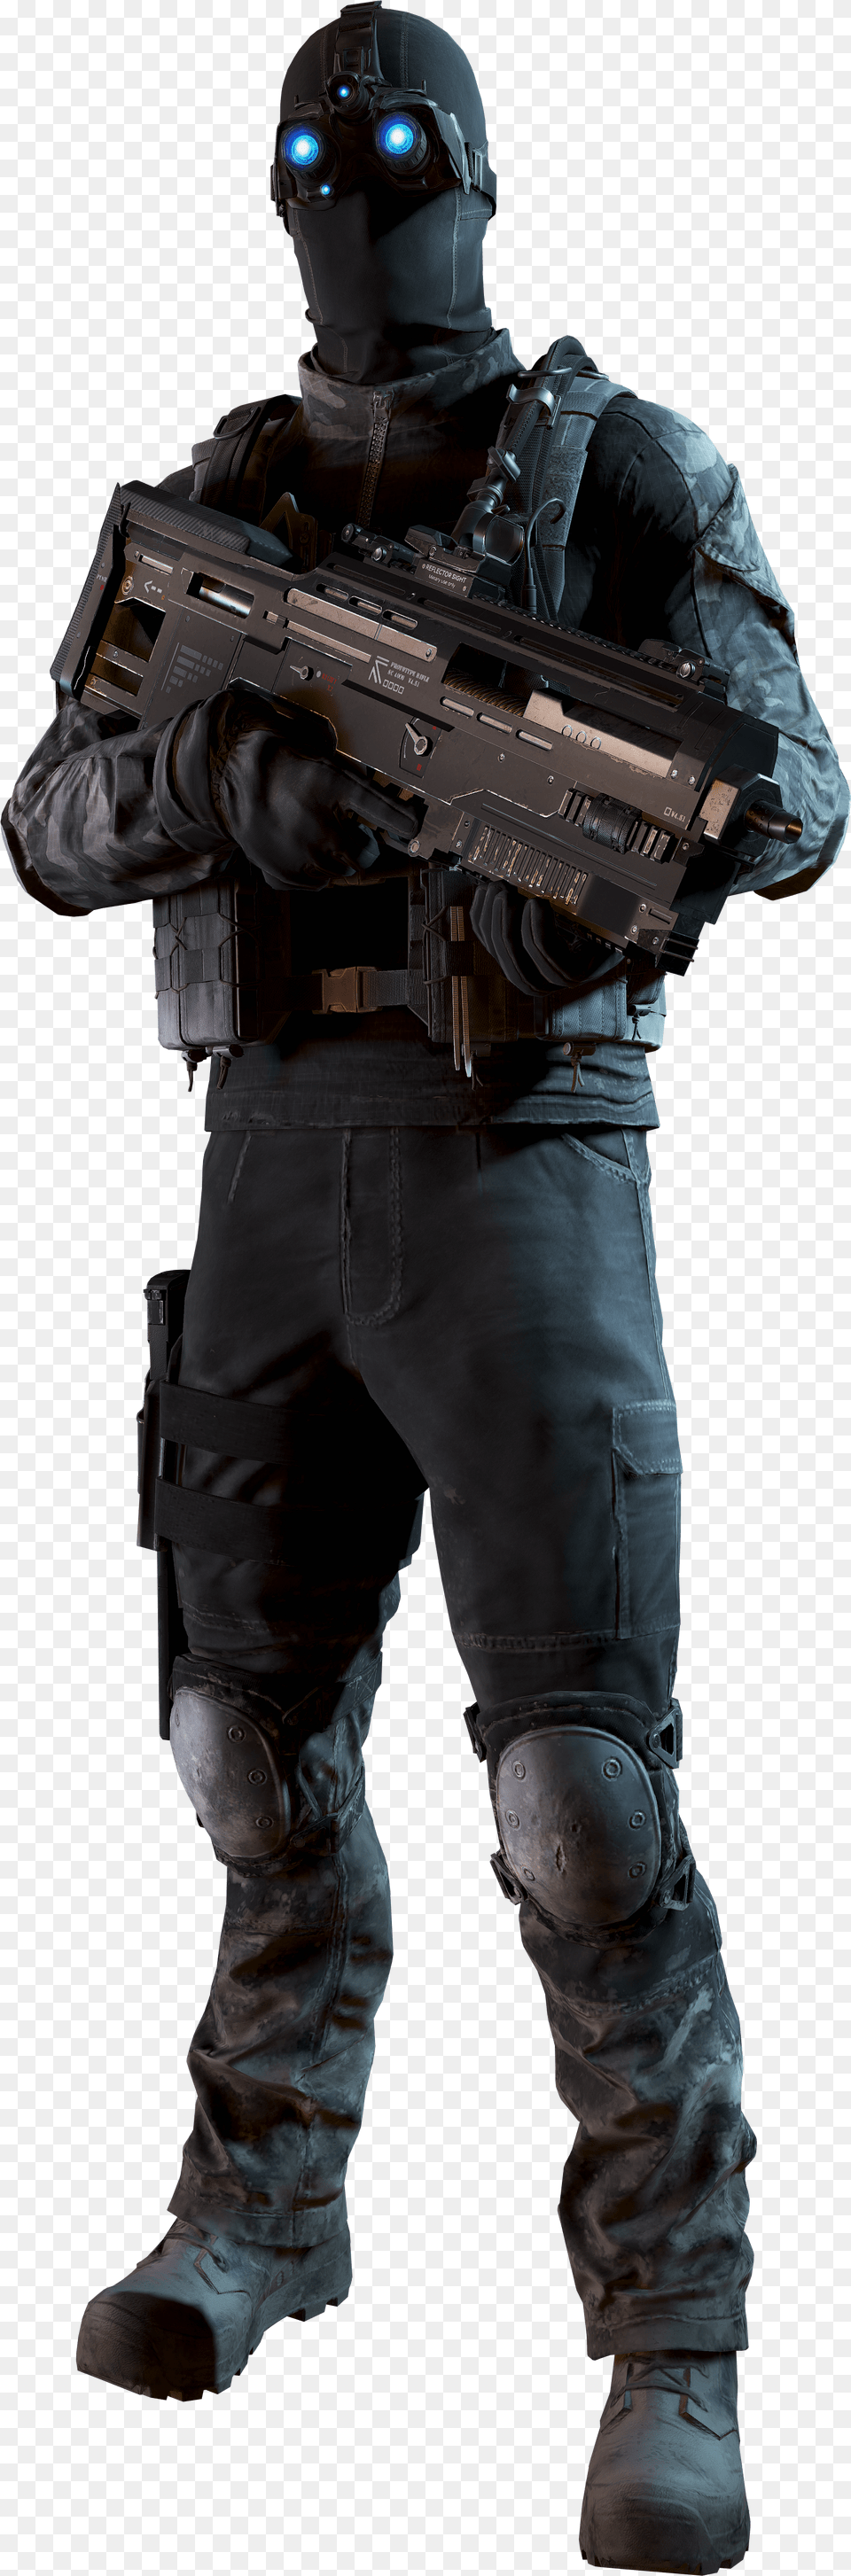 Ghost Recon Wildlands Splinter Cell, Gun, Weapon, Adult, Male Free Transparent Png